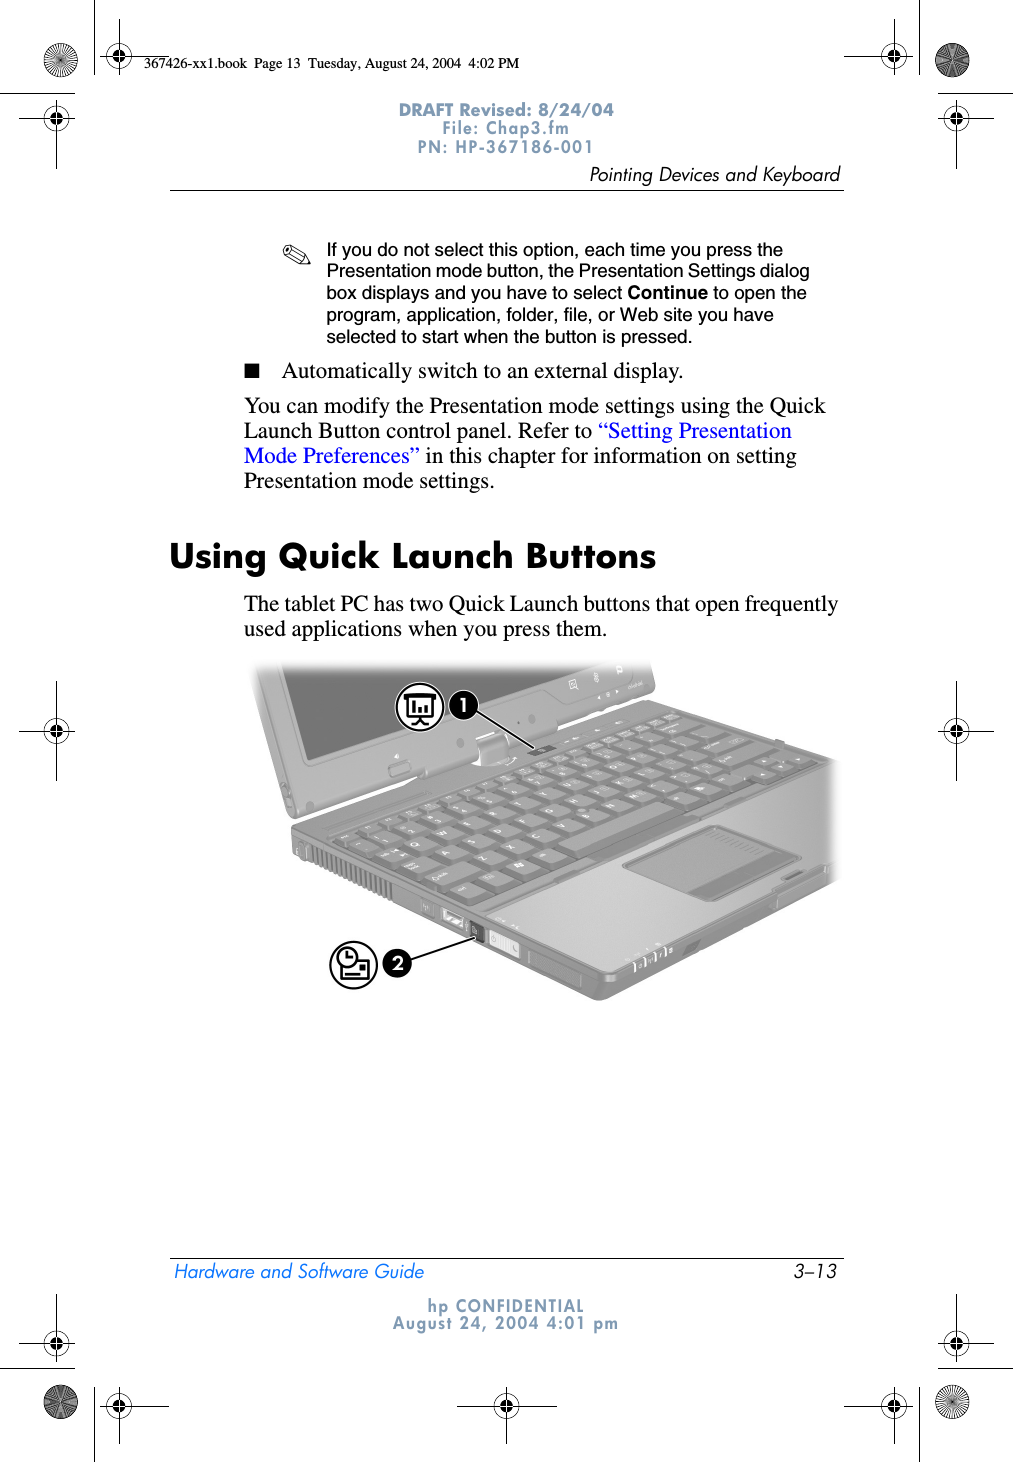 Pointing Devices and KeyboardHardware and Software Guide 3–13DRAFT Revised: 8/24/04File: Chap3.fm PN: HP-367186-001 hp CONFIDENTIALAugust 24, 2004 4:01 pm✎If you do not select this option, each time you press the Presentation mode button, the Presentation Settings dialog box displays and you have to select Continue to open the program, application, folder, file, or Web site you have selected to start when the button is pressed.■Automatically switch to an external display.You can modify the Presentation mode settings using the Quick Launch Button control panel. Refer to “Setting Presentation Mode Preferences” in this chapter for information on setting Presentation mode settings.Using Quick Launch ButtonsThe tablet PC has two Quick Launch buttons that open frequently used applications when you press them.367426-xx1.book  Page 13  Tuesday, August 24, 2004  4:02 PM